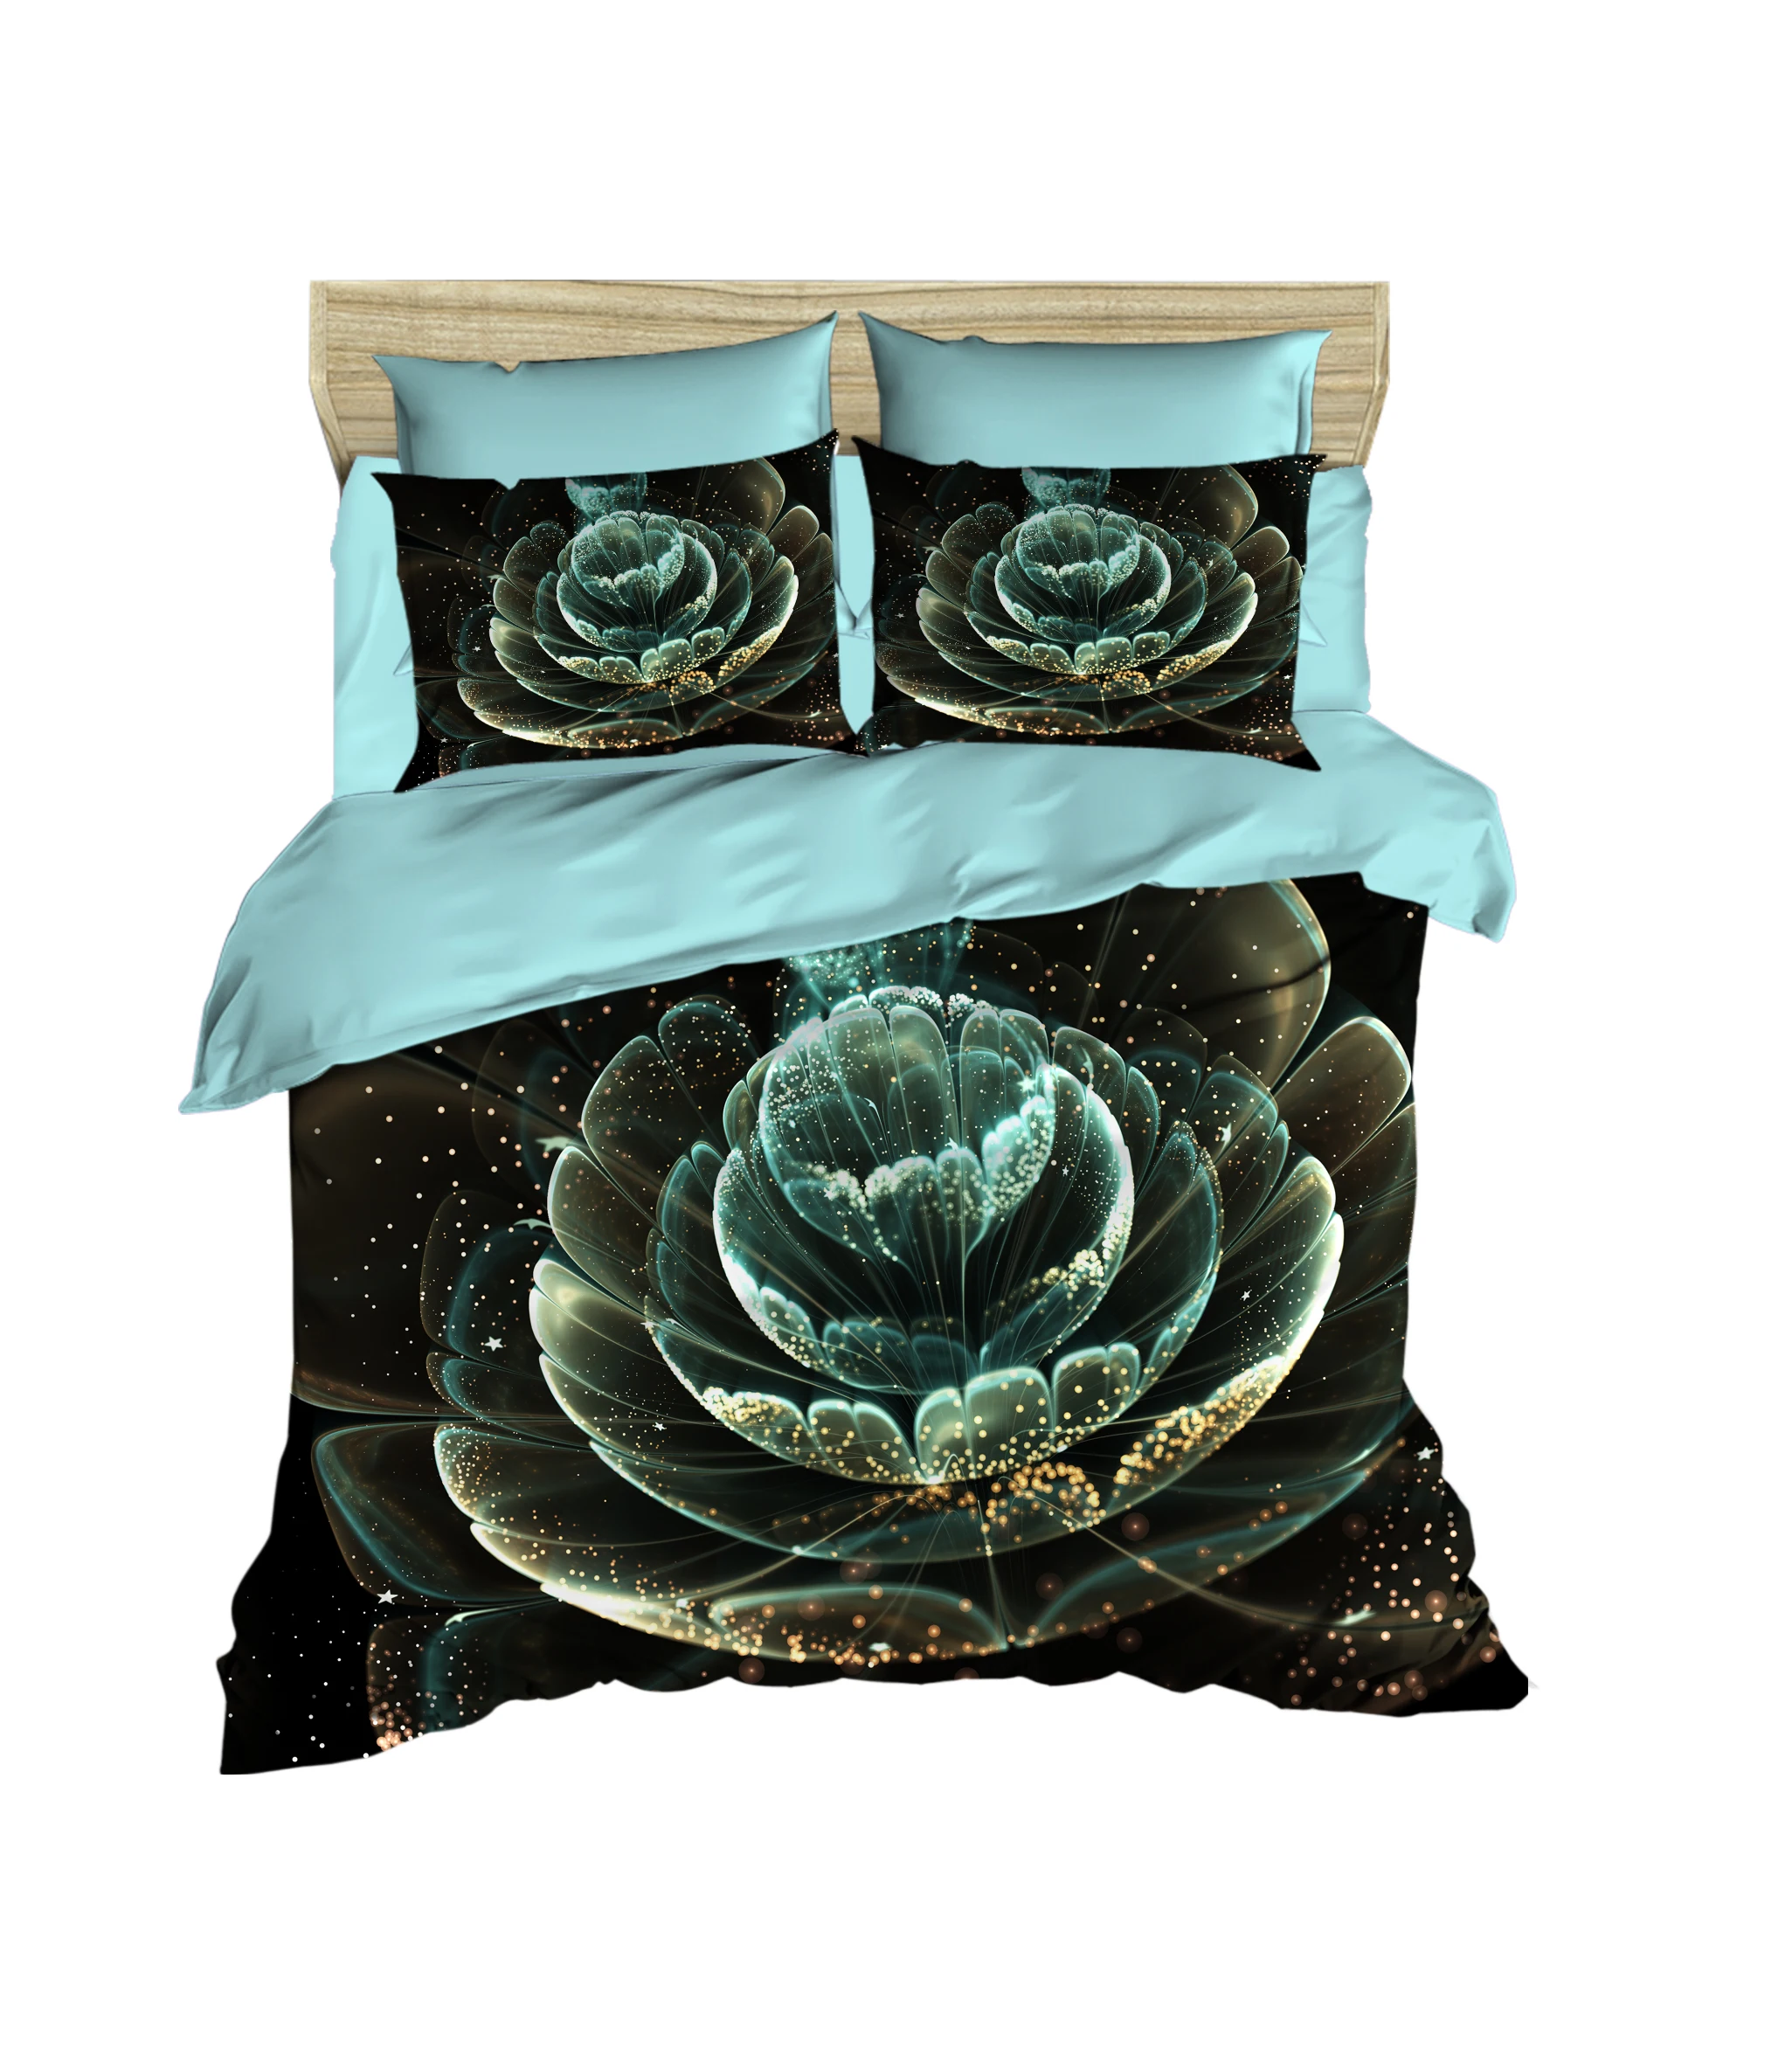 

100% Turkish Cotton Floral Bedding Lotus Flower Themed 3D Printed Duvet Cover Set, All Sizes, Made in Turkey